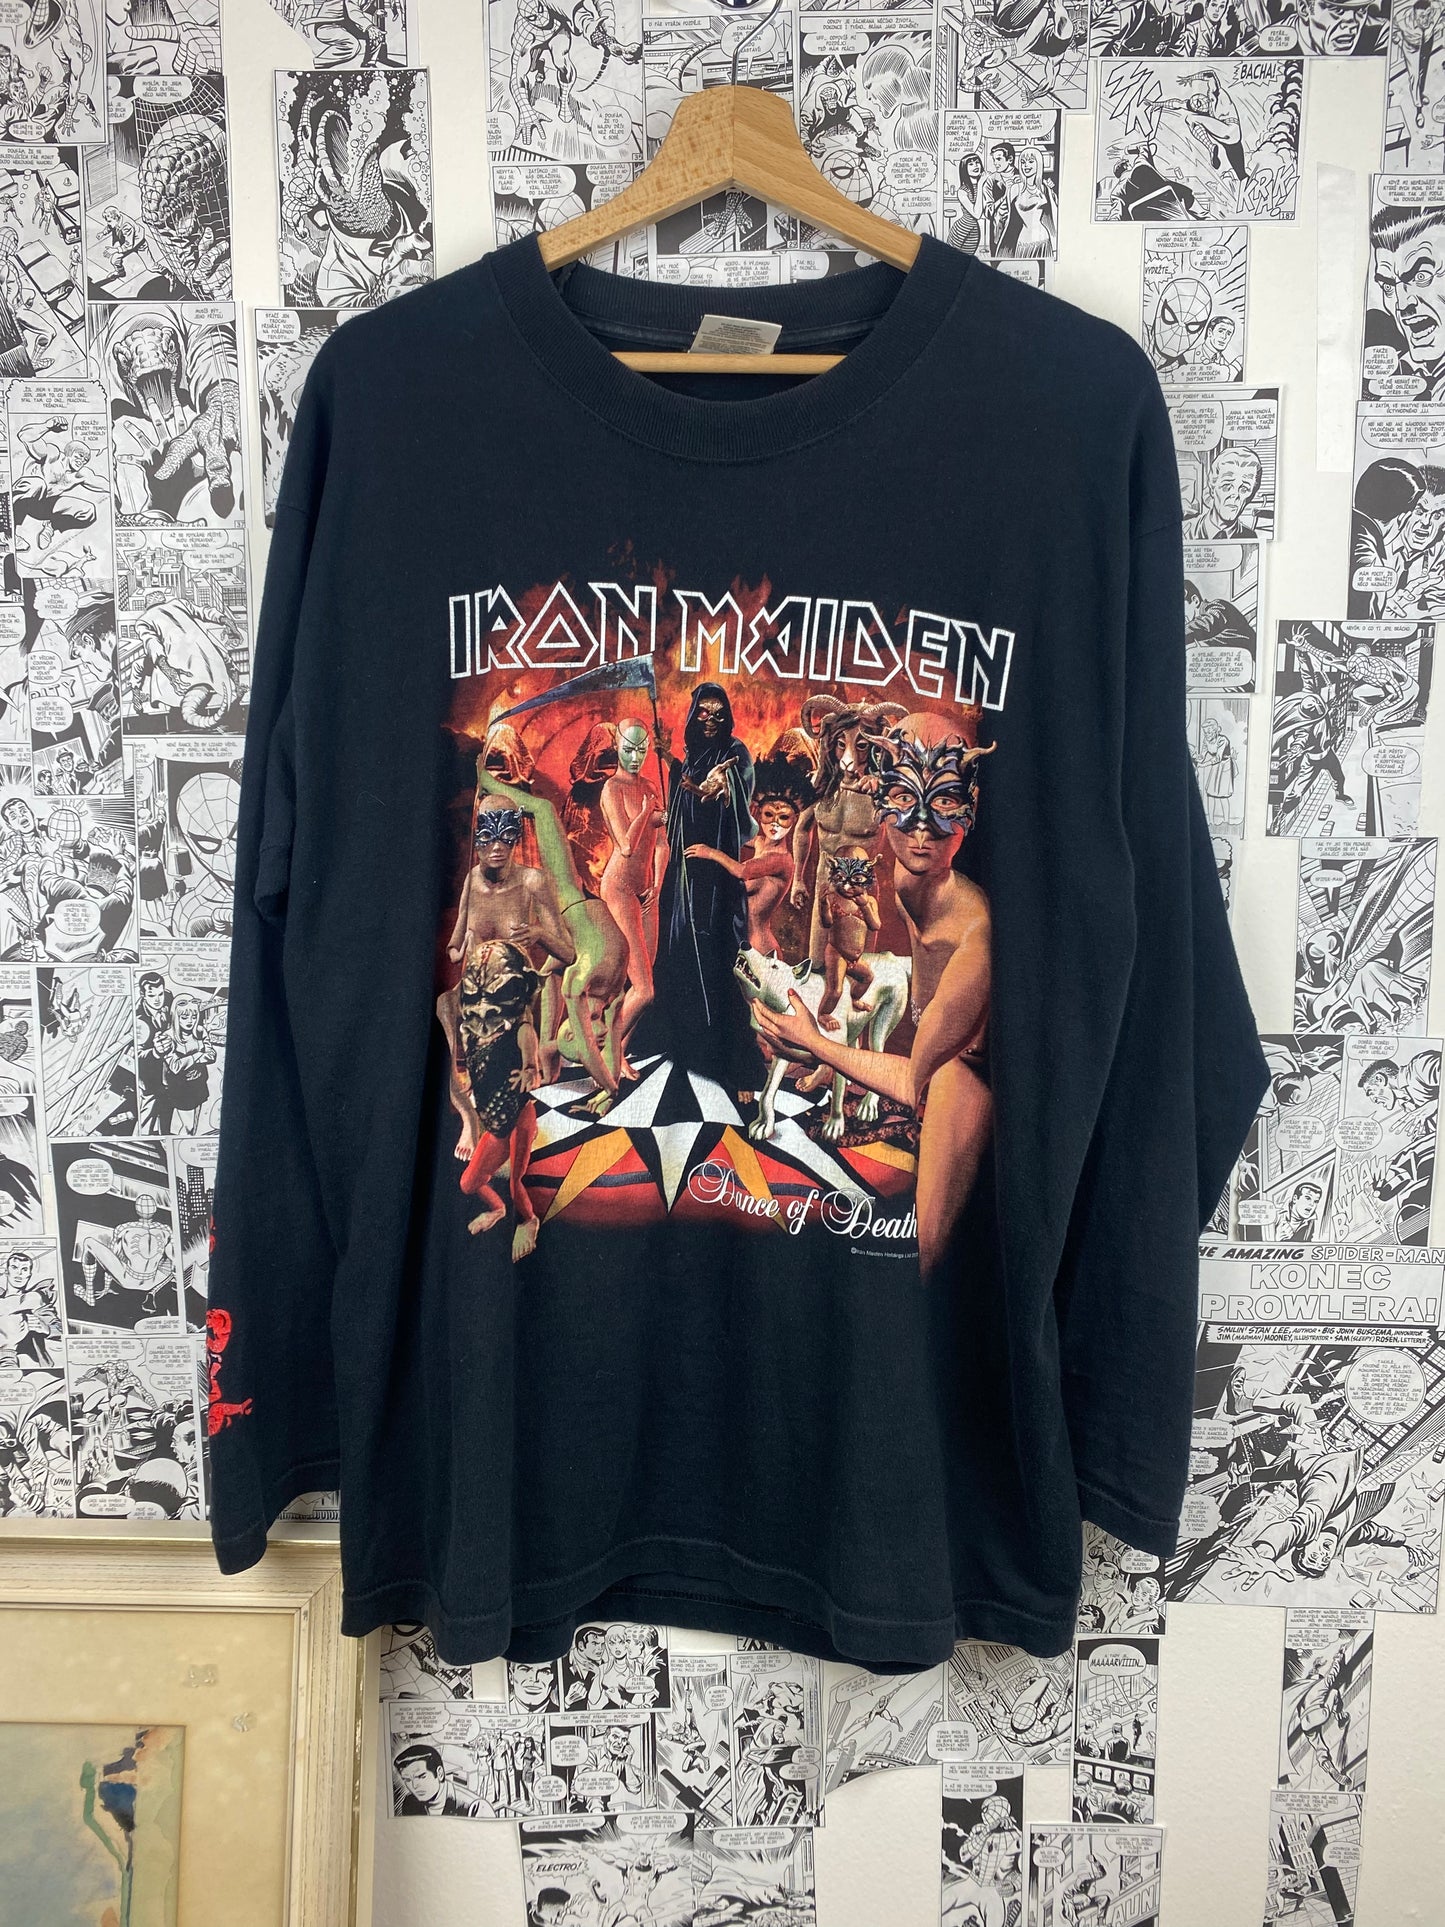 Vintage Iron Maiden “Dance of the Death” T-shirt - size M